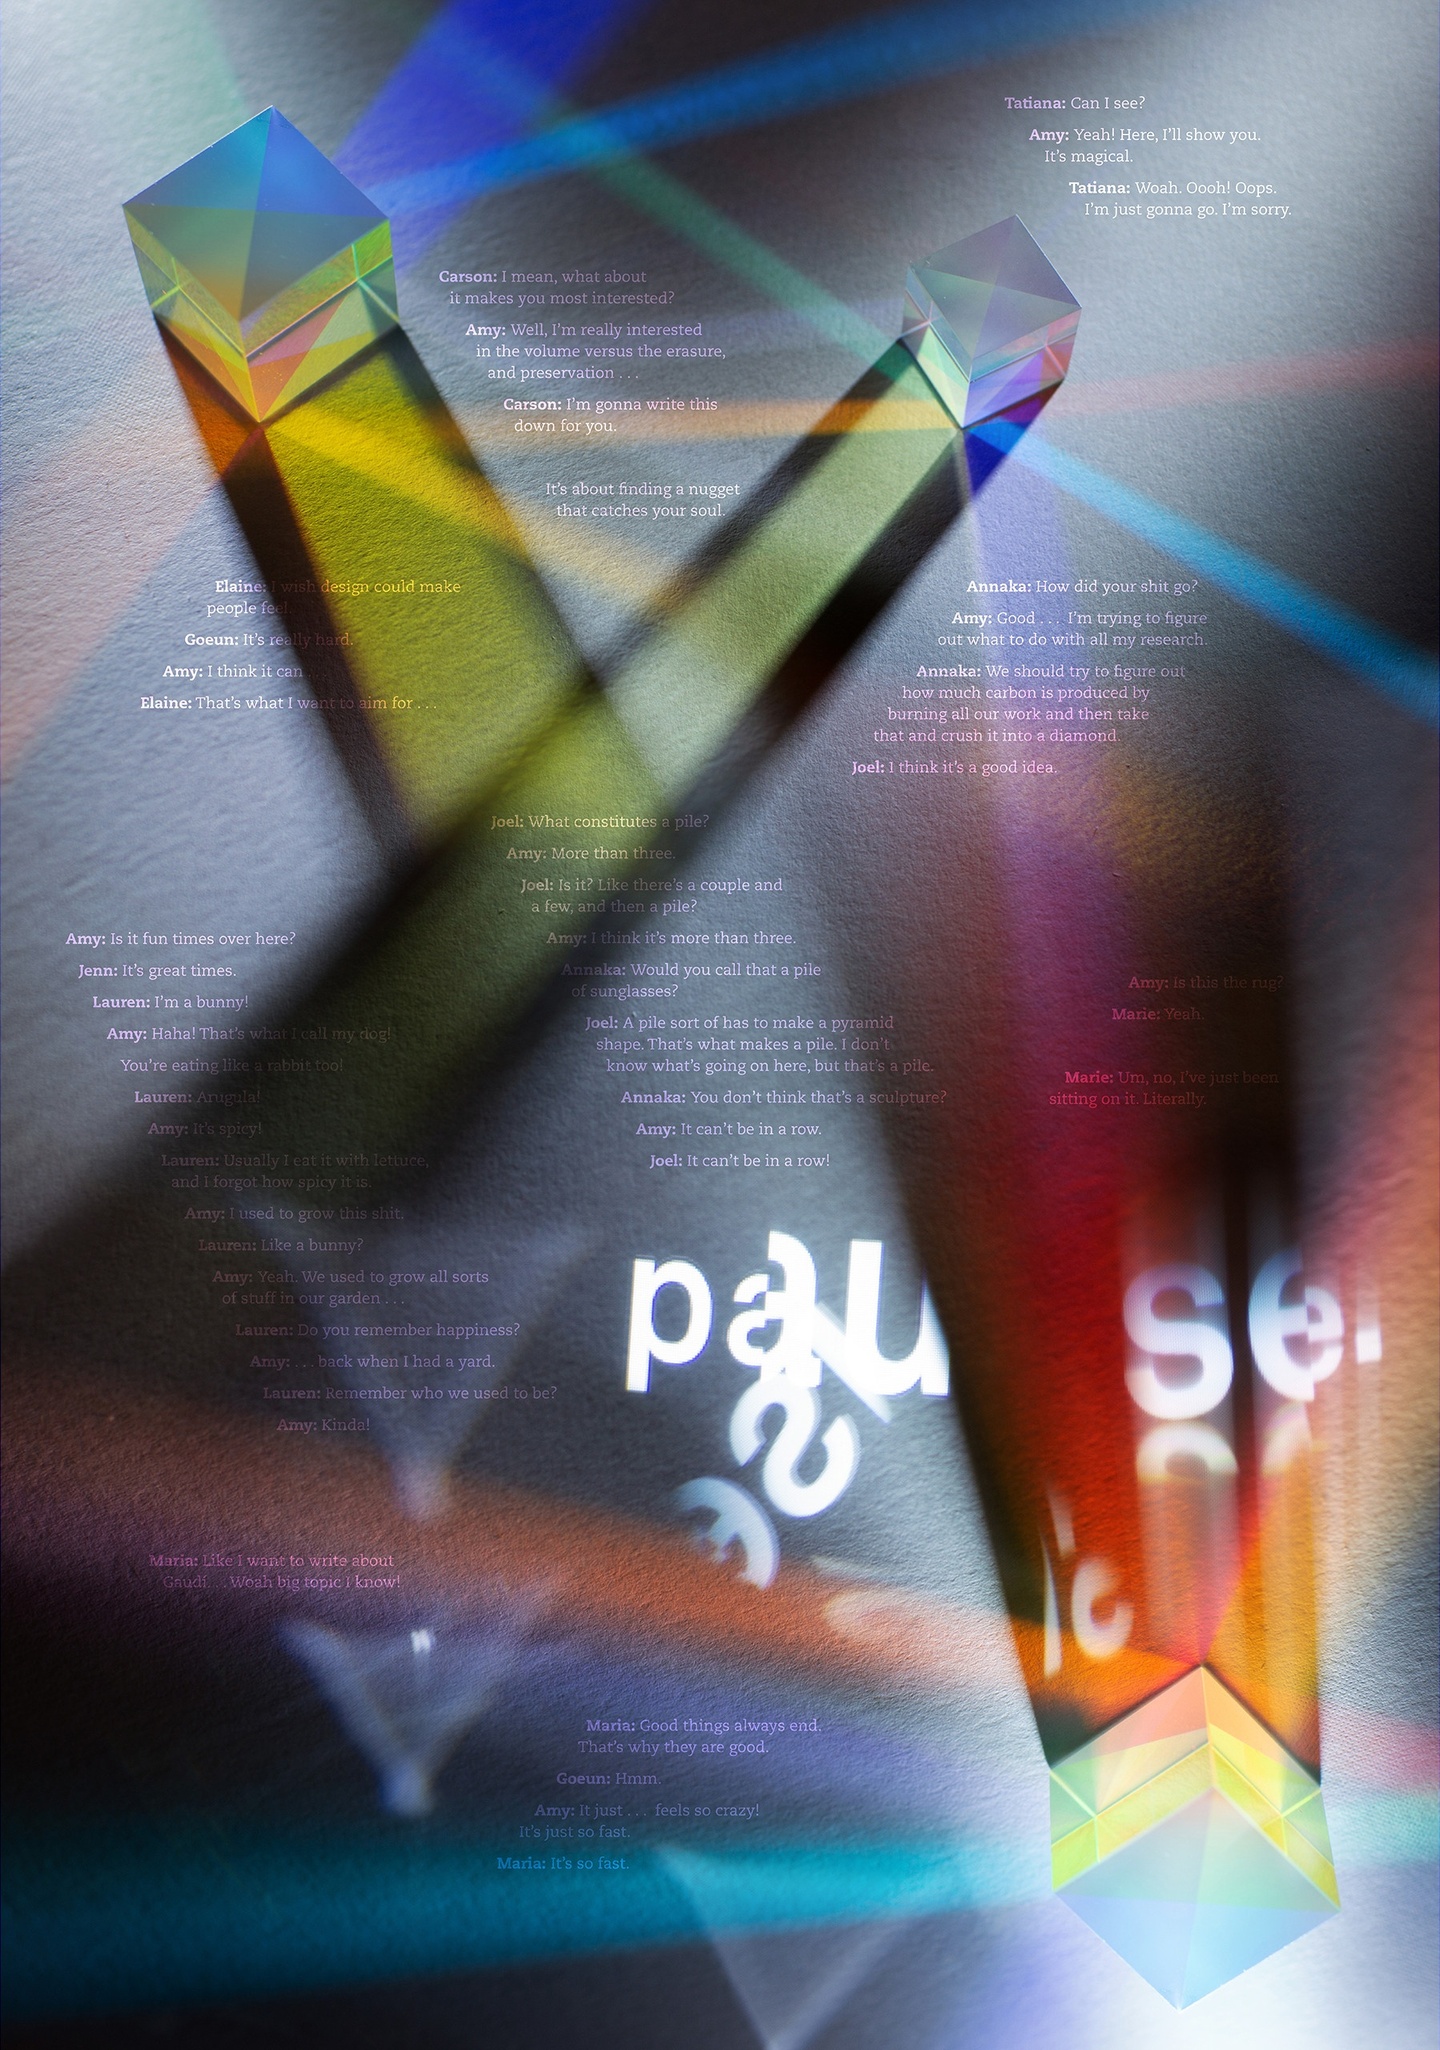 A poster: the text "pause", in white, refracted and reflected by three prisms, whose shadows and light are captured in diagonal lines that radiate light across the poster. In parallelogram-bound shapes are sections of an interview, the text printed in white, all following the rays of light projected onto the background by the three prisms. The light is dim and bright in different areas, creating a textured, ambient atmosphere.